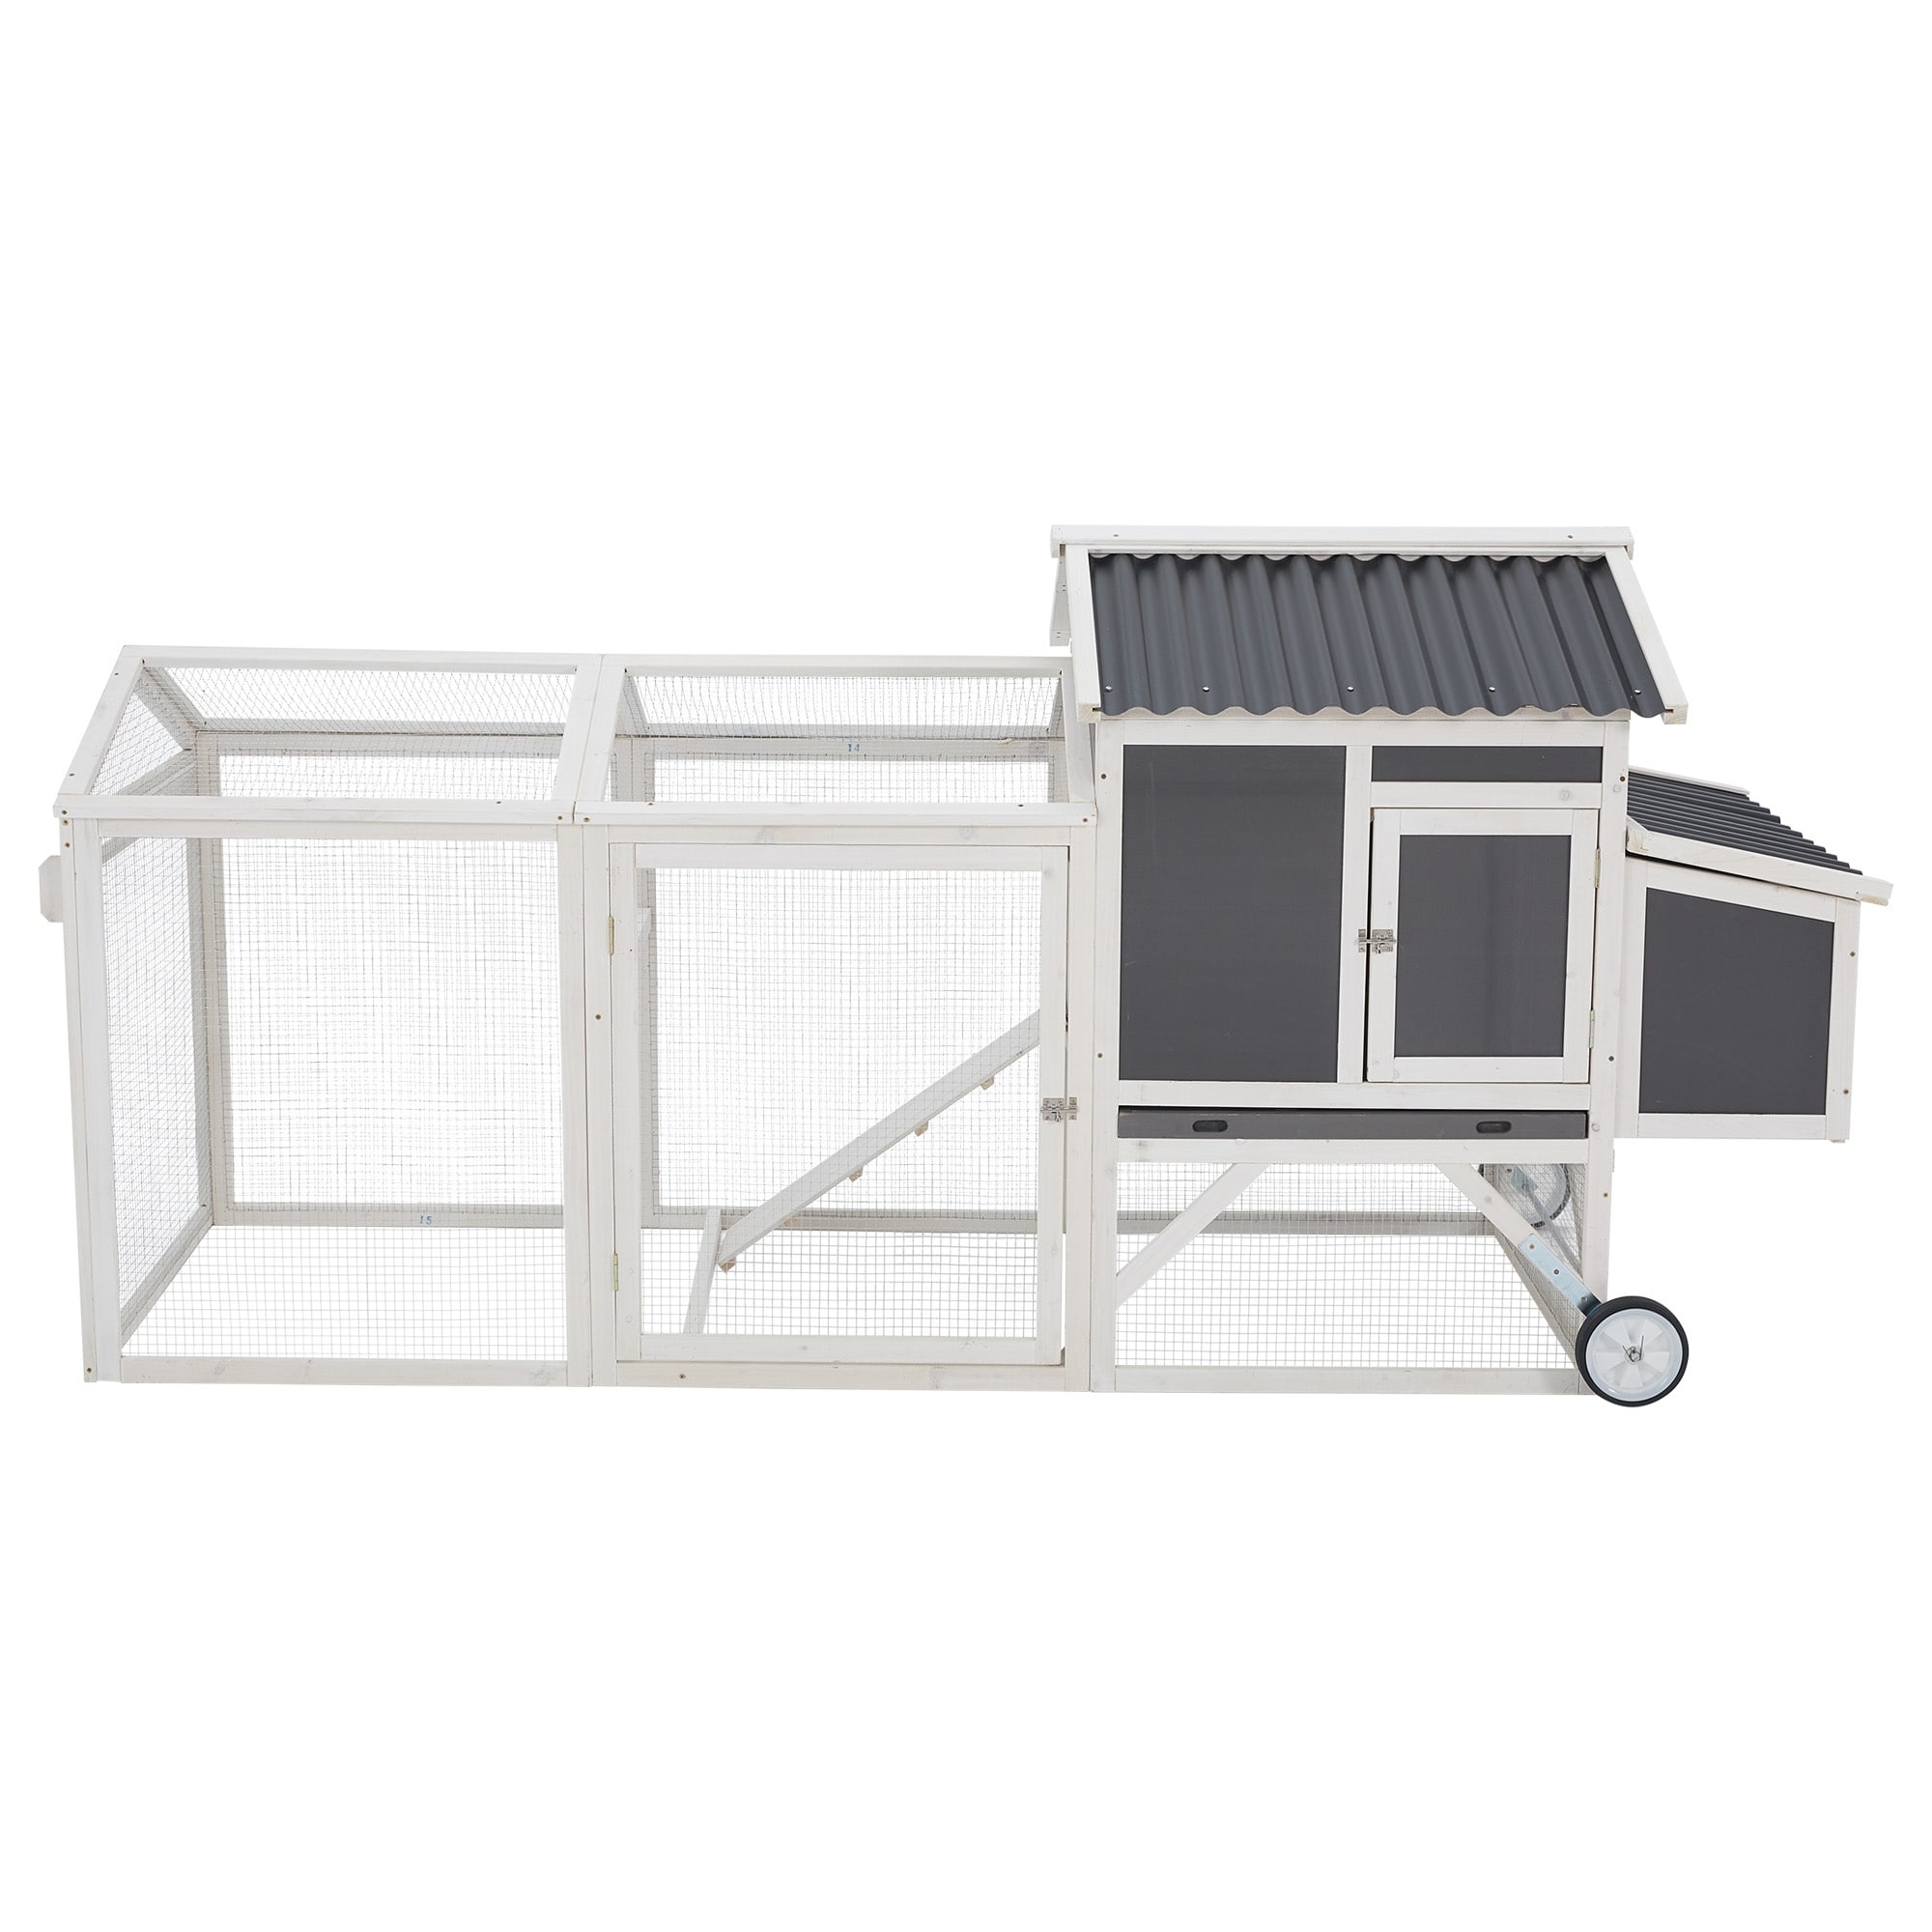 Clihome Chicken Coops - Bed Bath & Beyond